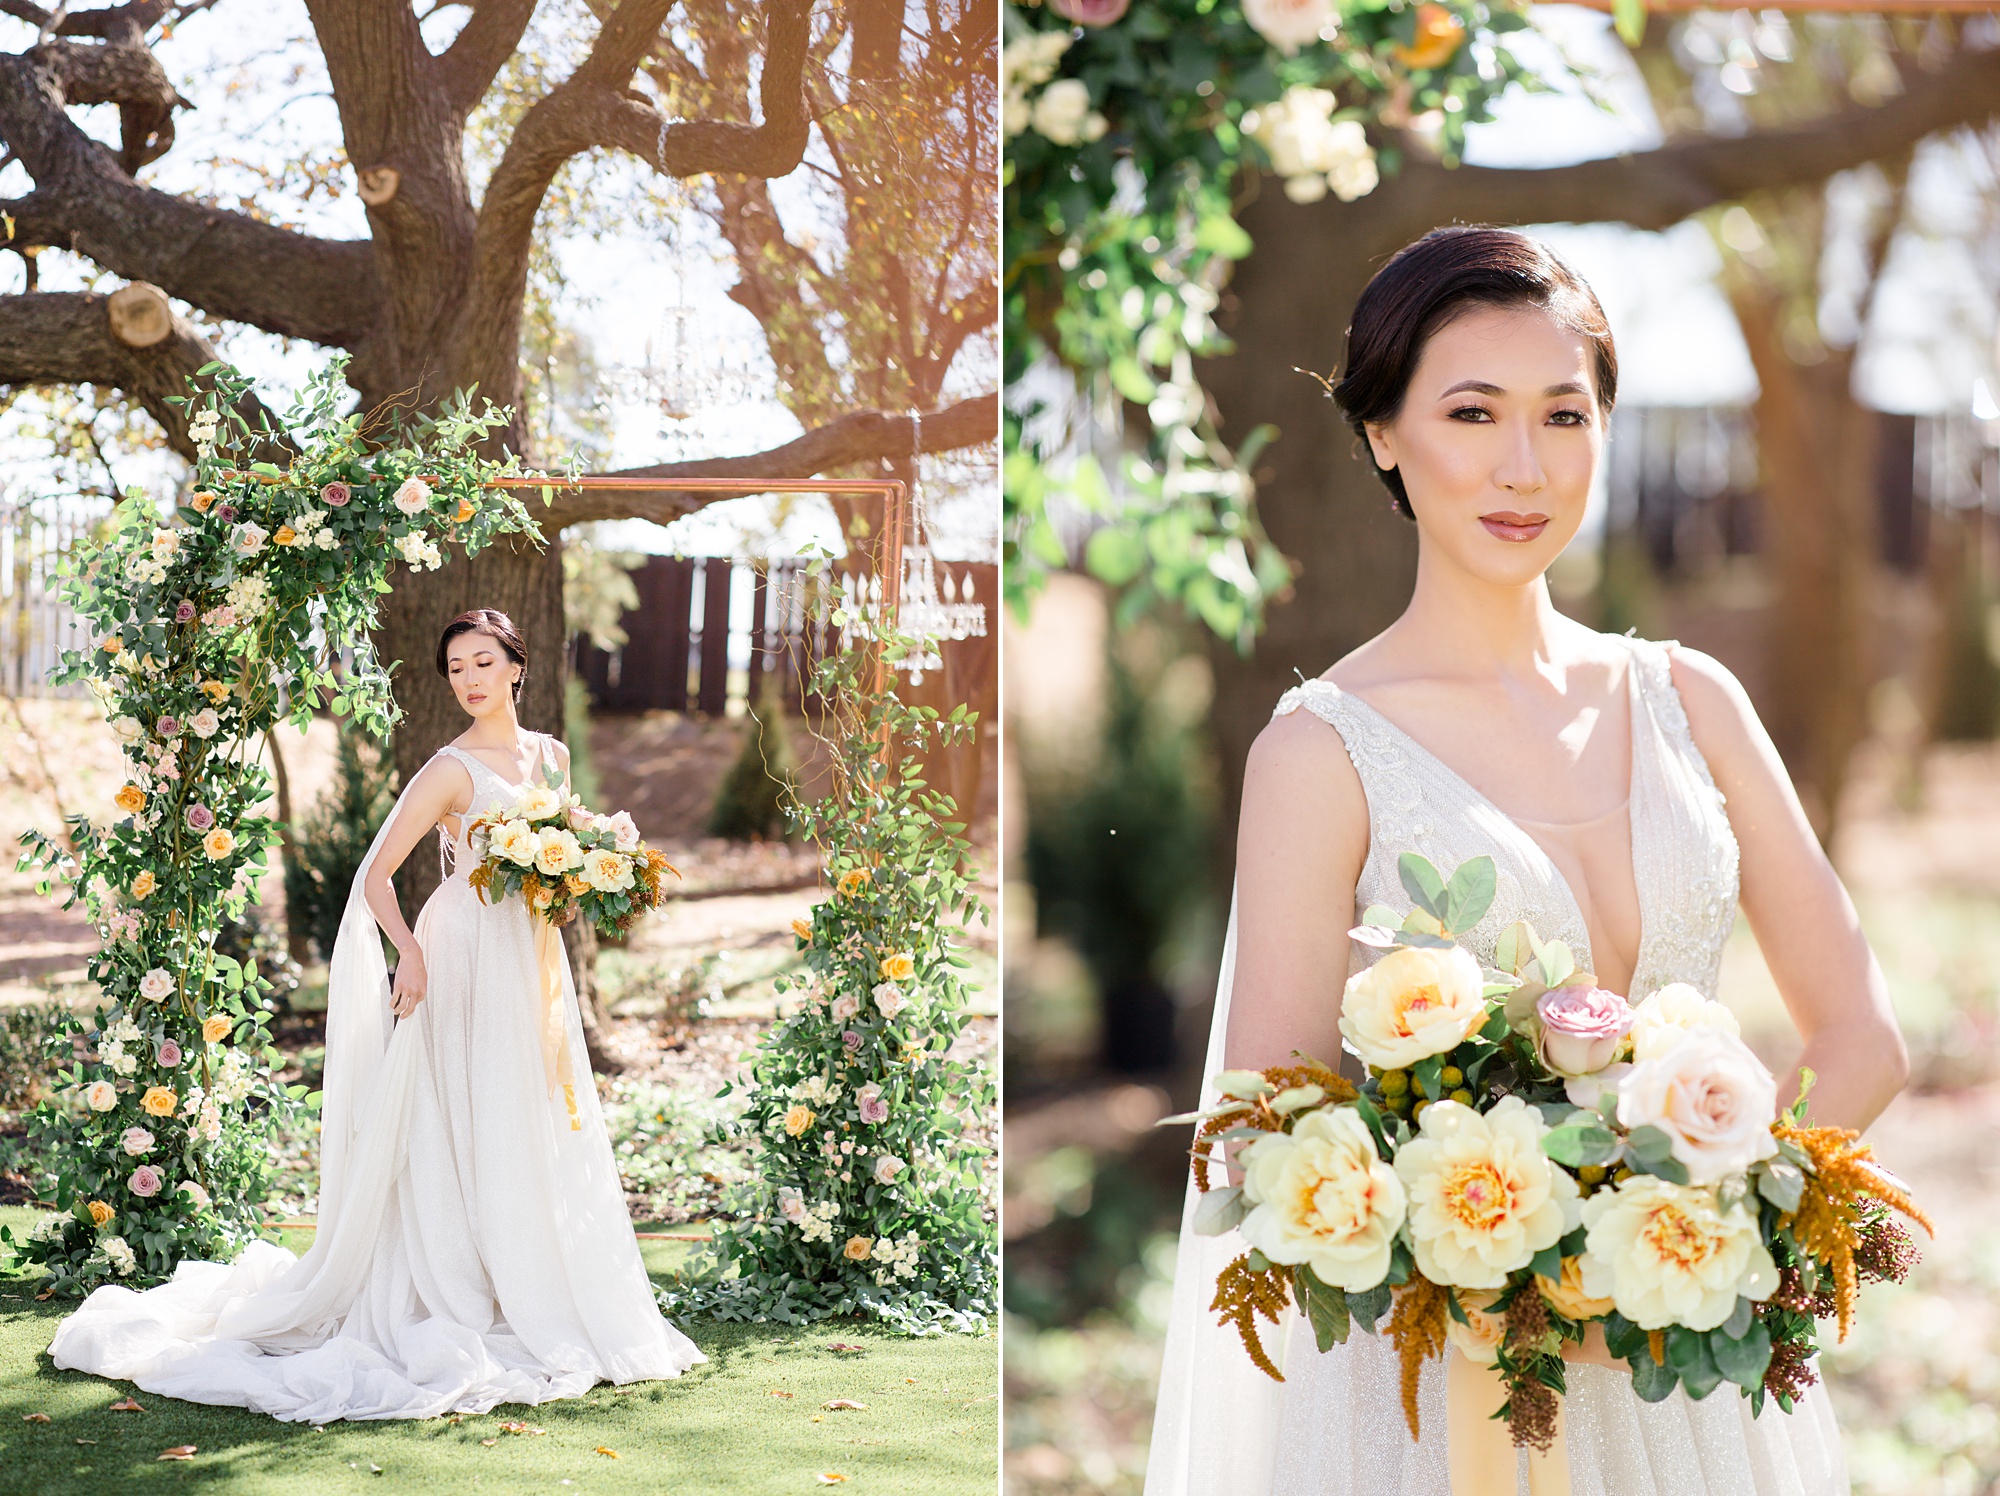 Brighton Abbey Styled Shoot with bride holding bouquet with yellow flowers